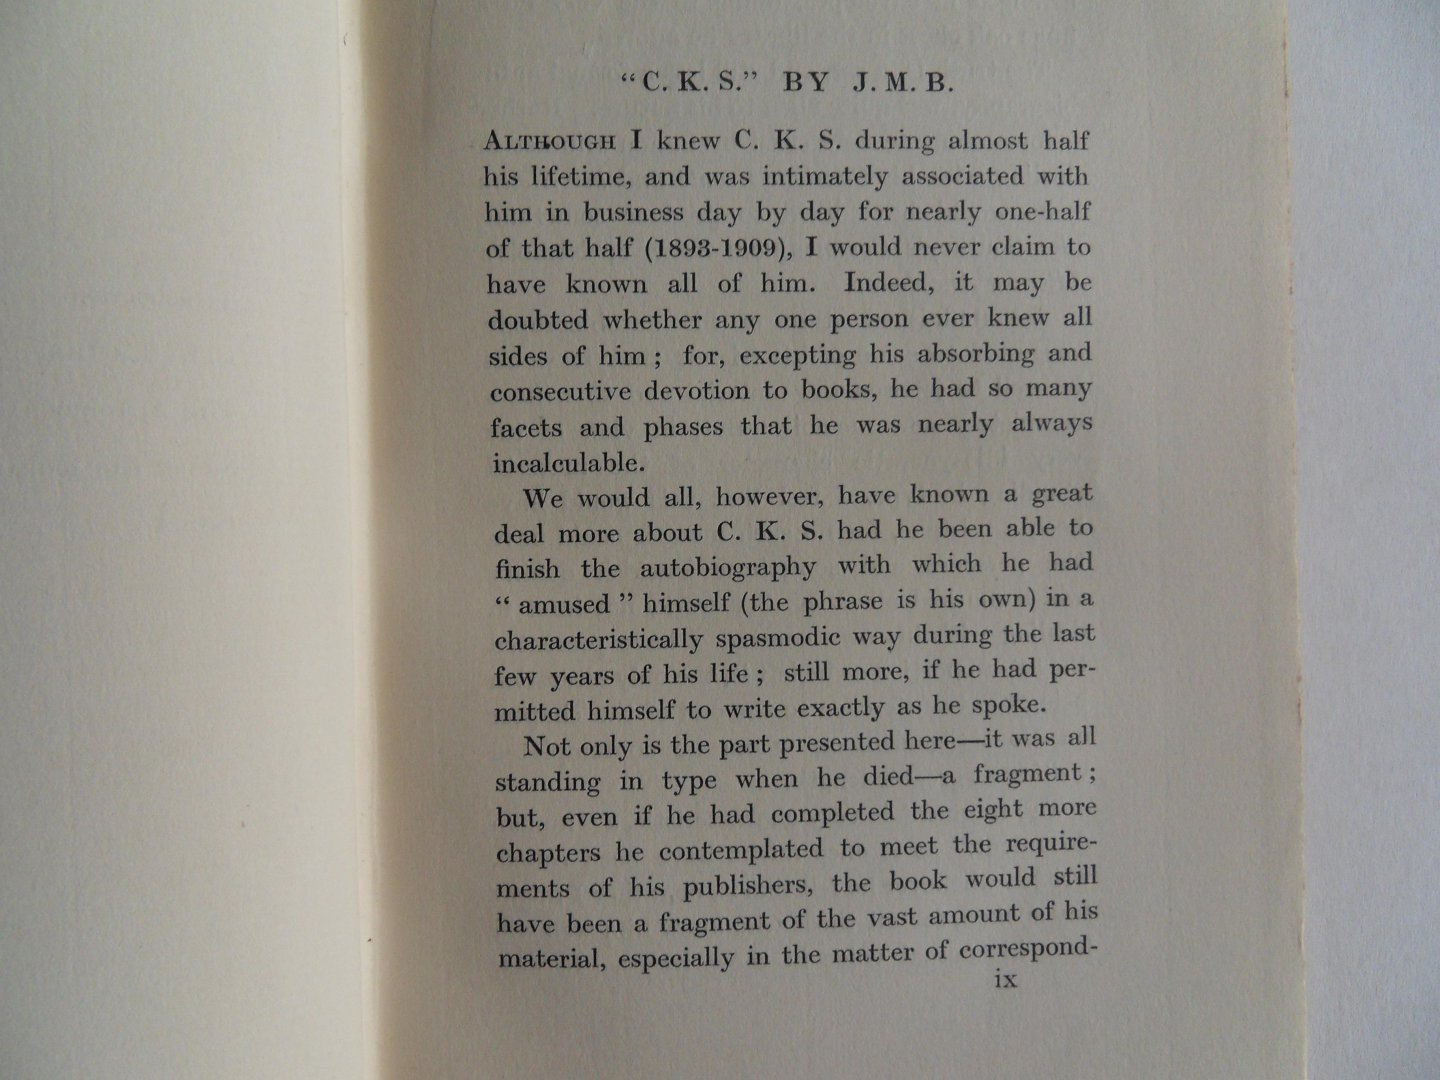 C.K.S. [ Shorter ]. edited by J.M. Bulloch. - C.K.S. An Autobiography. [ limited edition privately printed ].